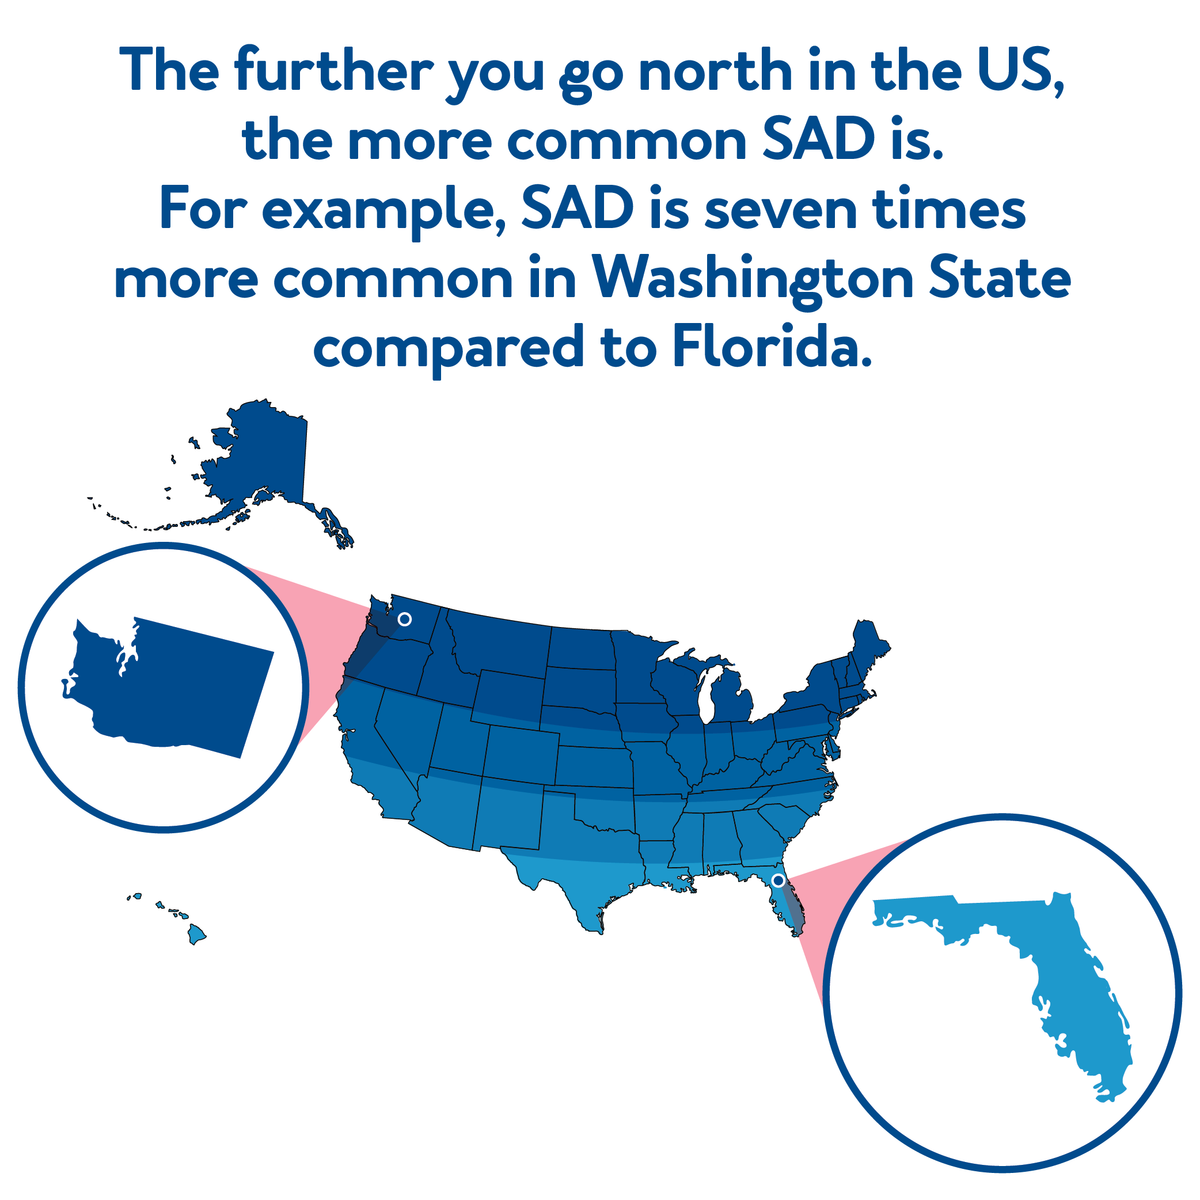 The further you go north in the US, the more common SAD is, further details are provided below.